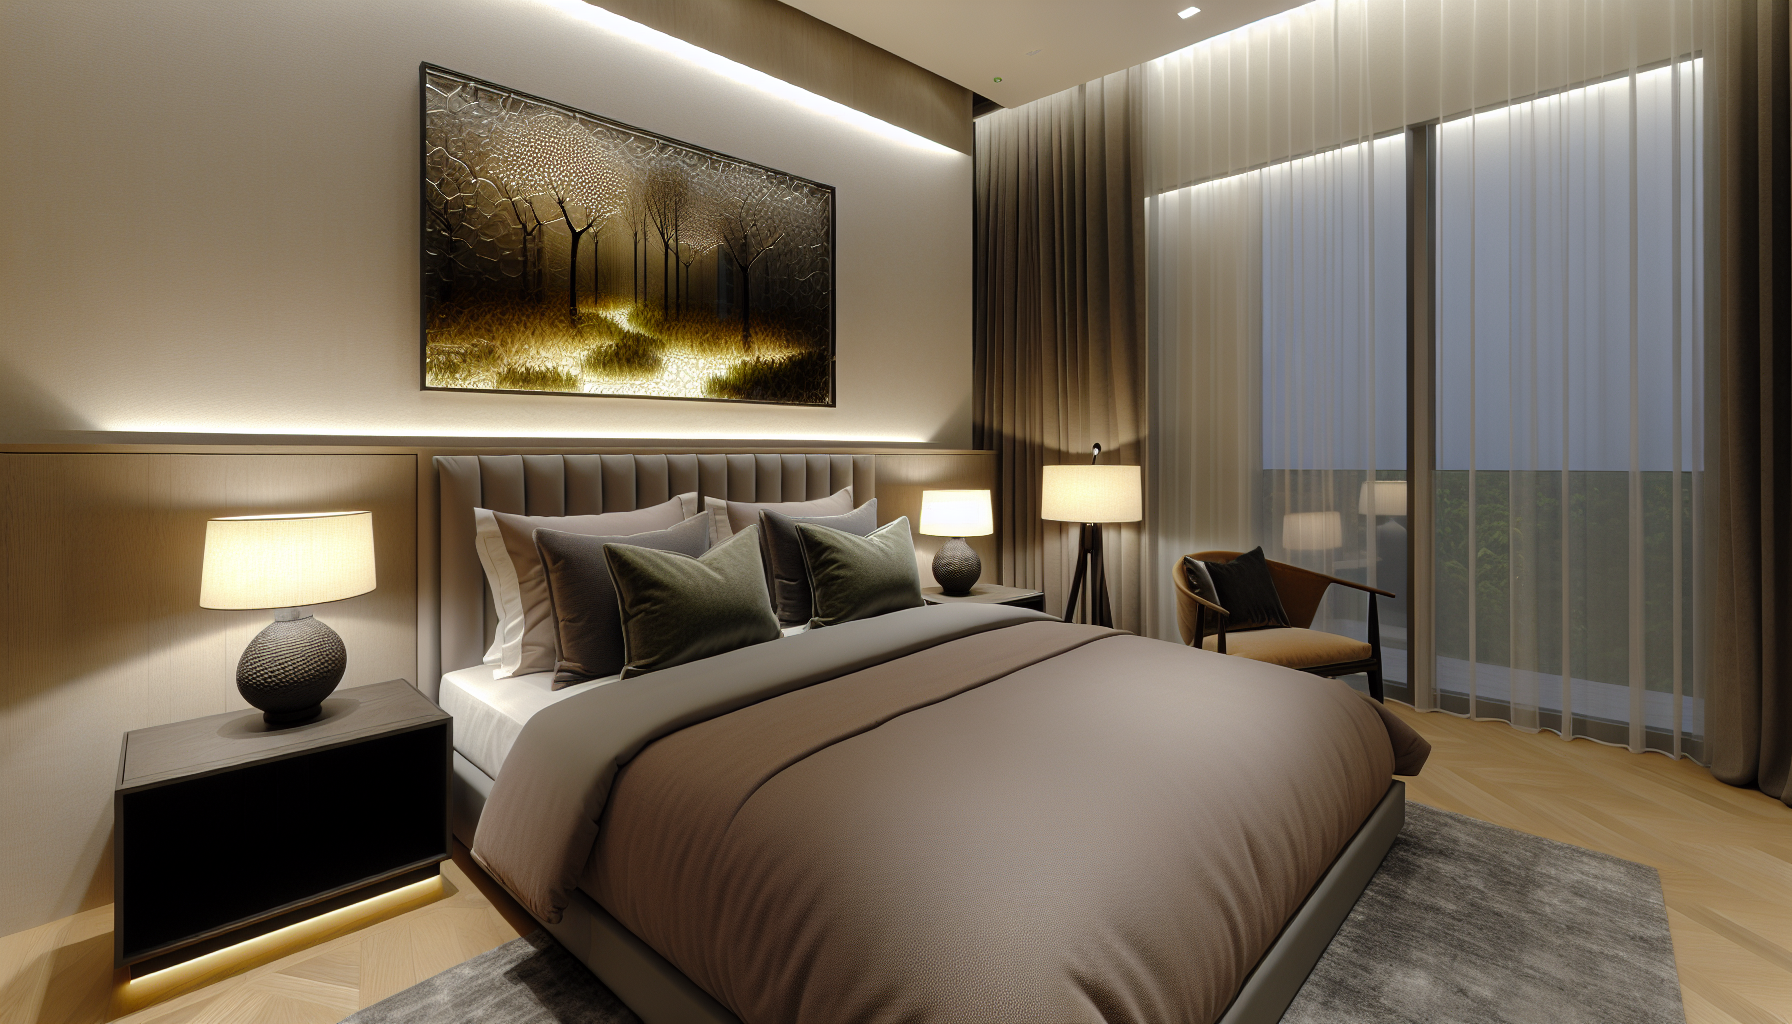 Glass wall art in a stylish bedroom